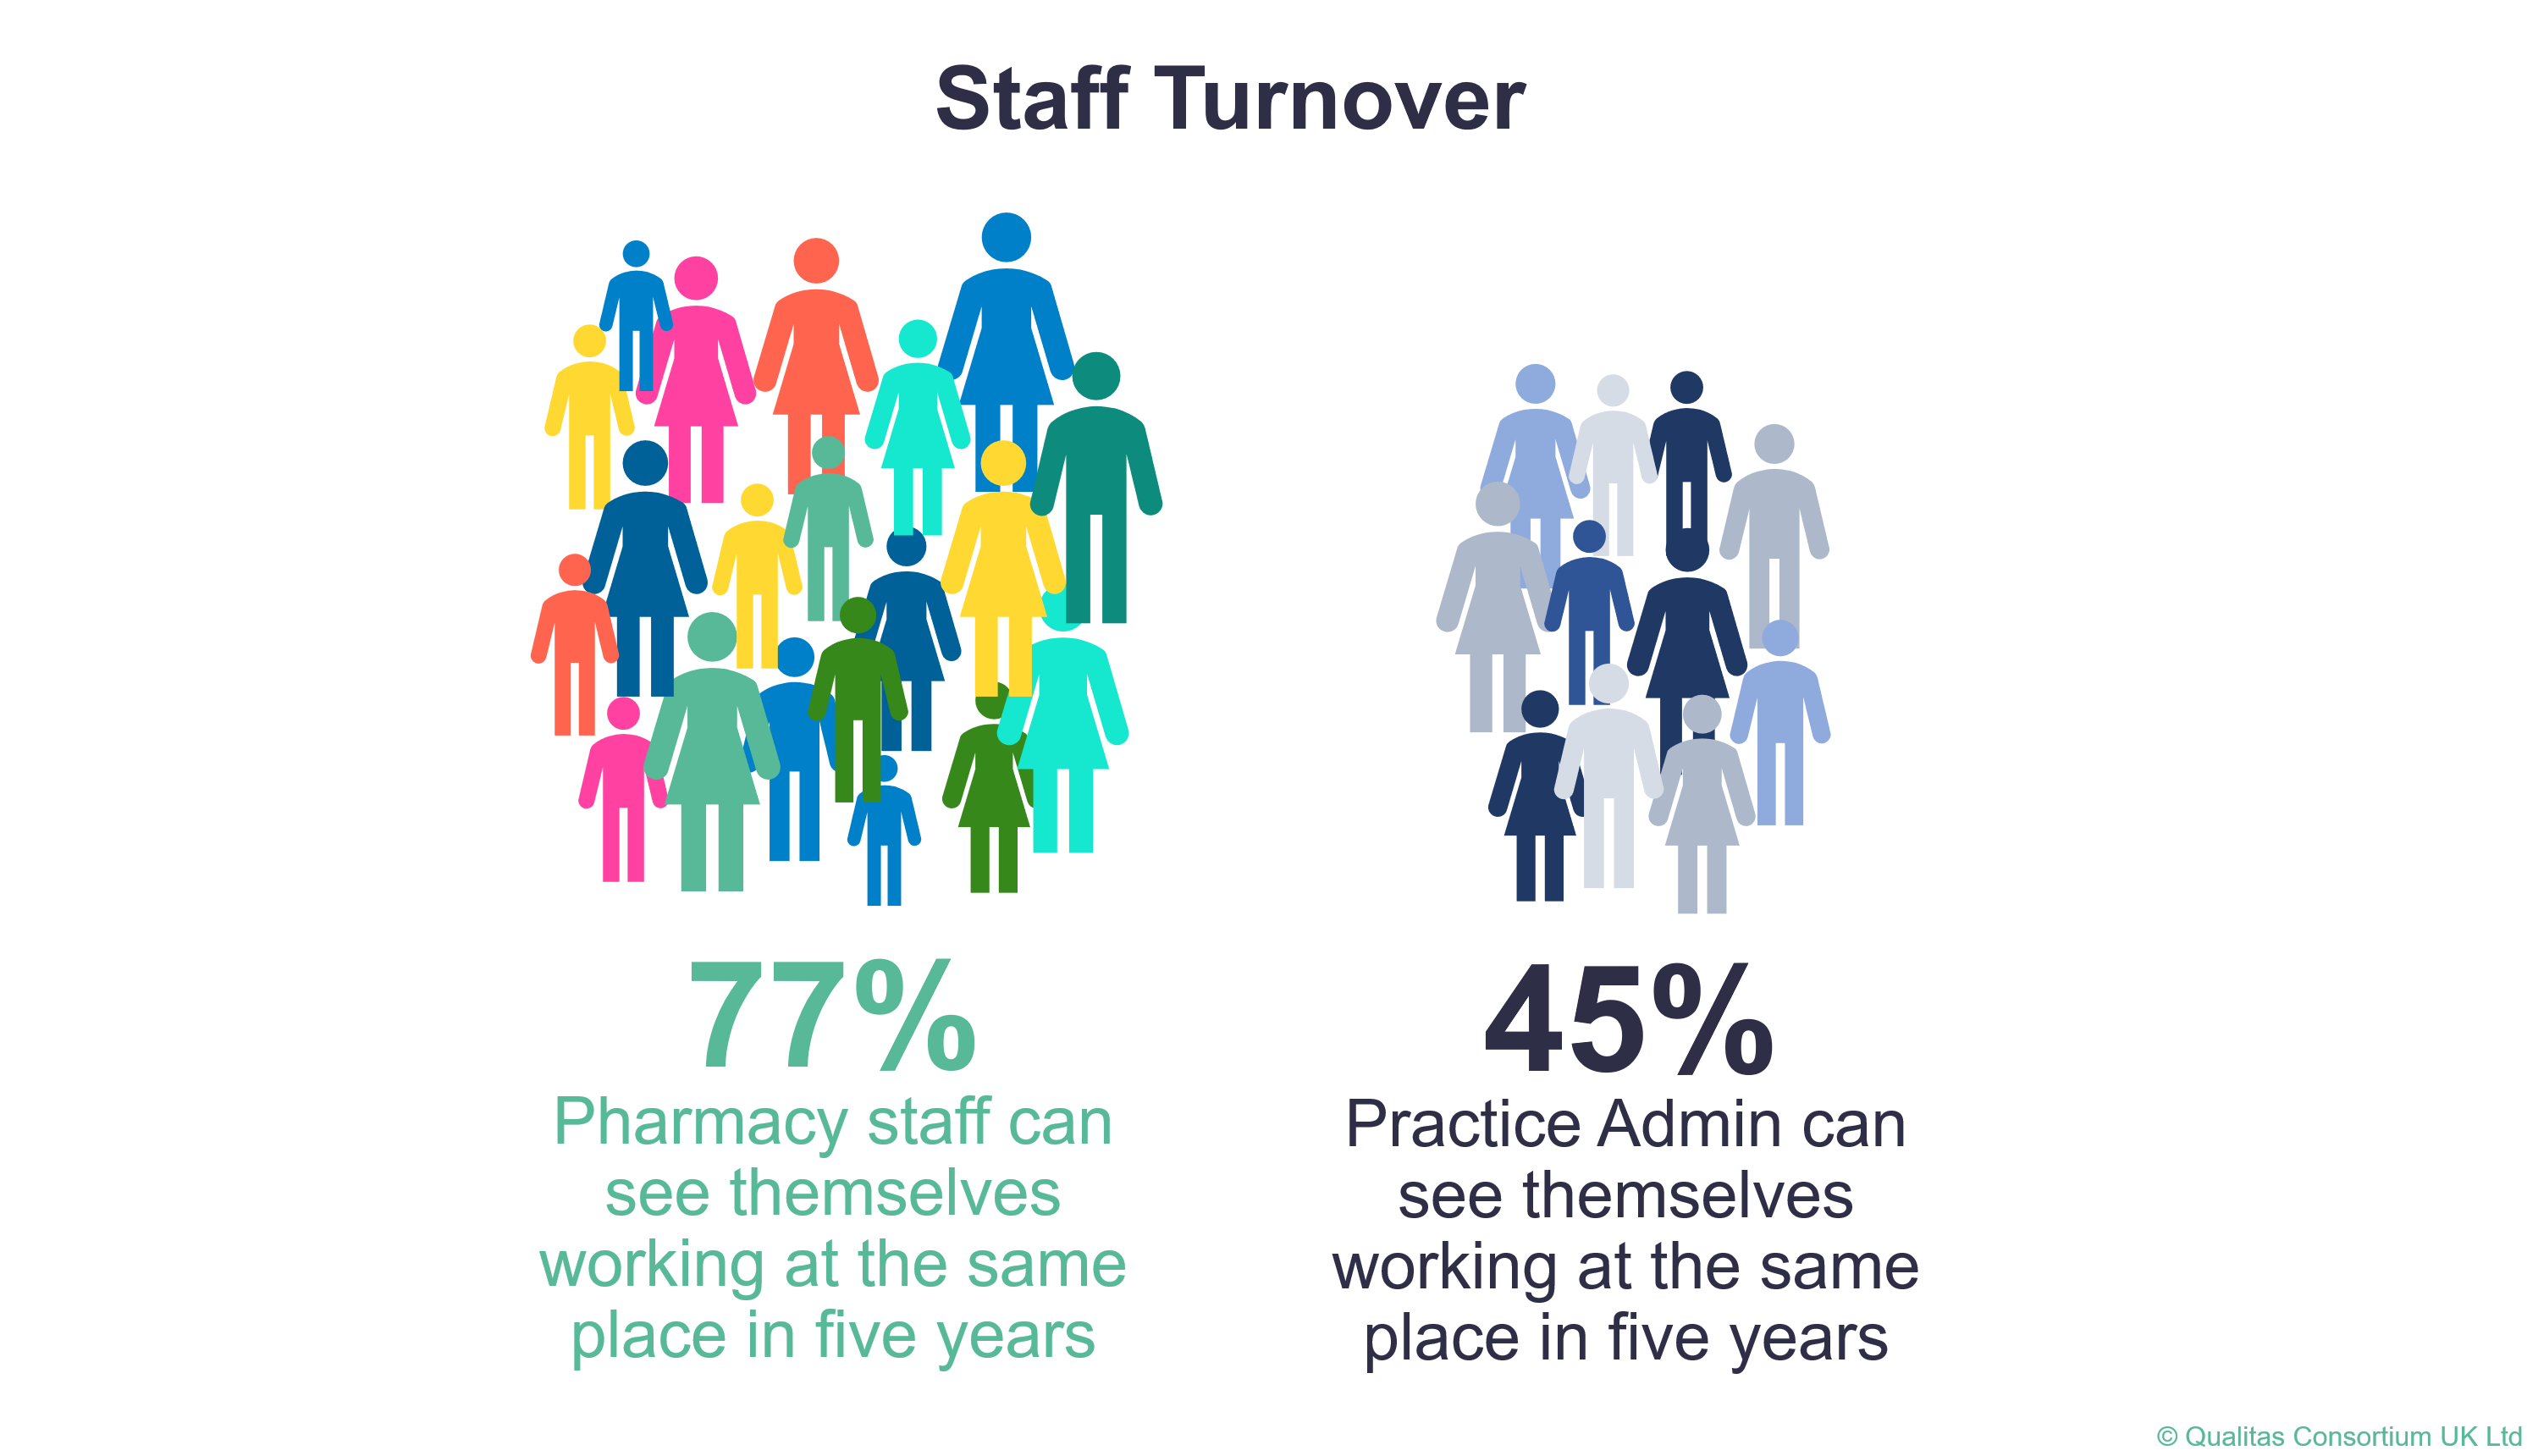 Empower your staff to create an outstanding practice